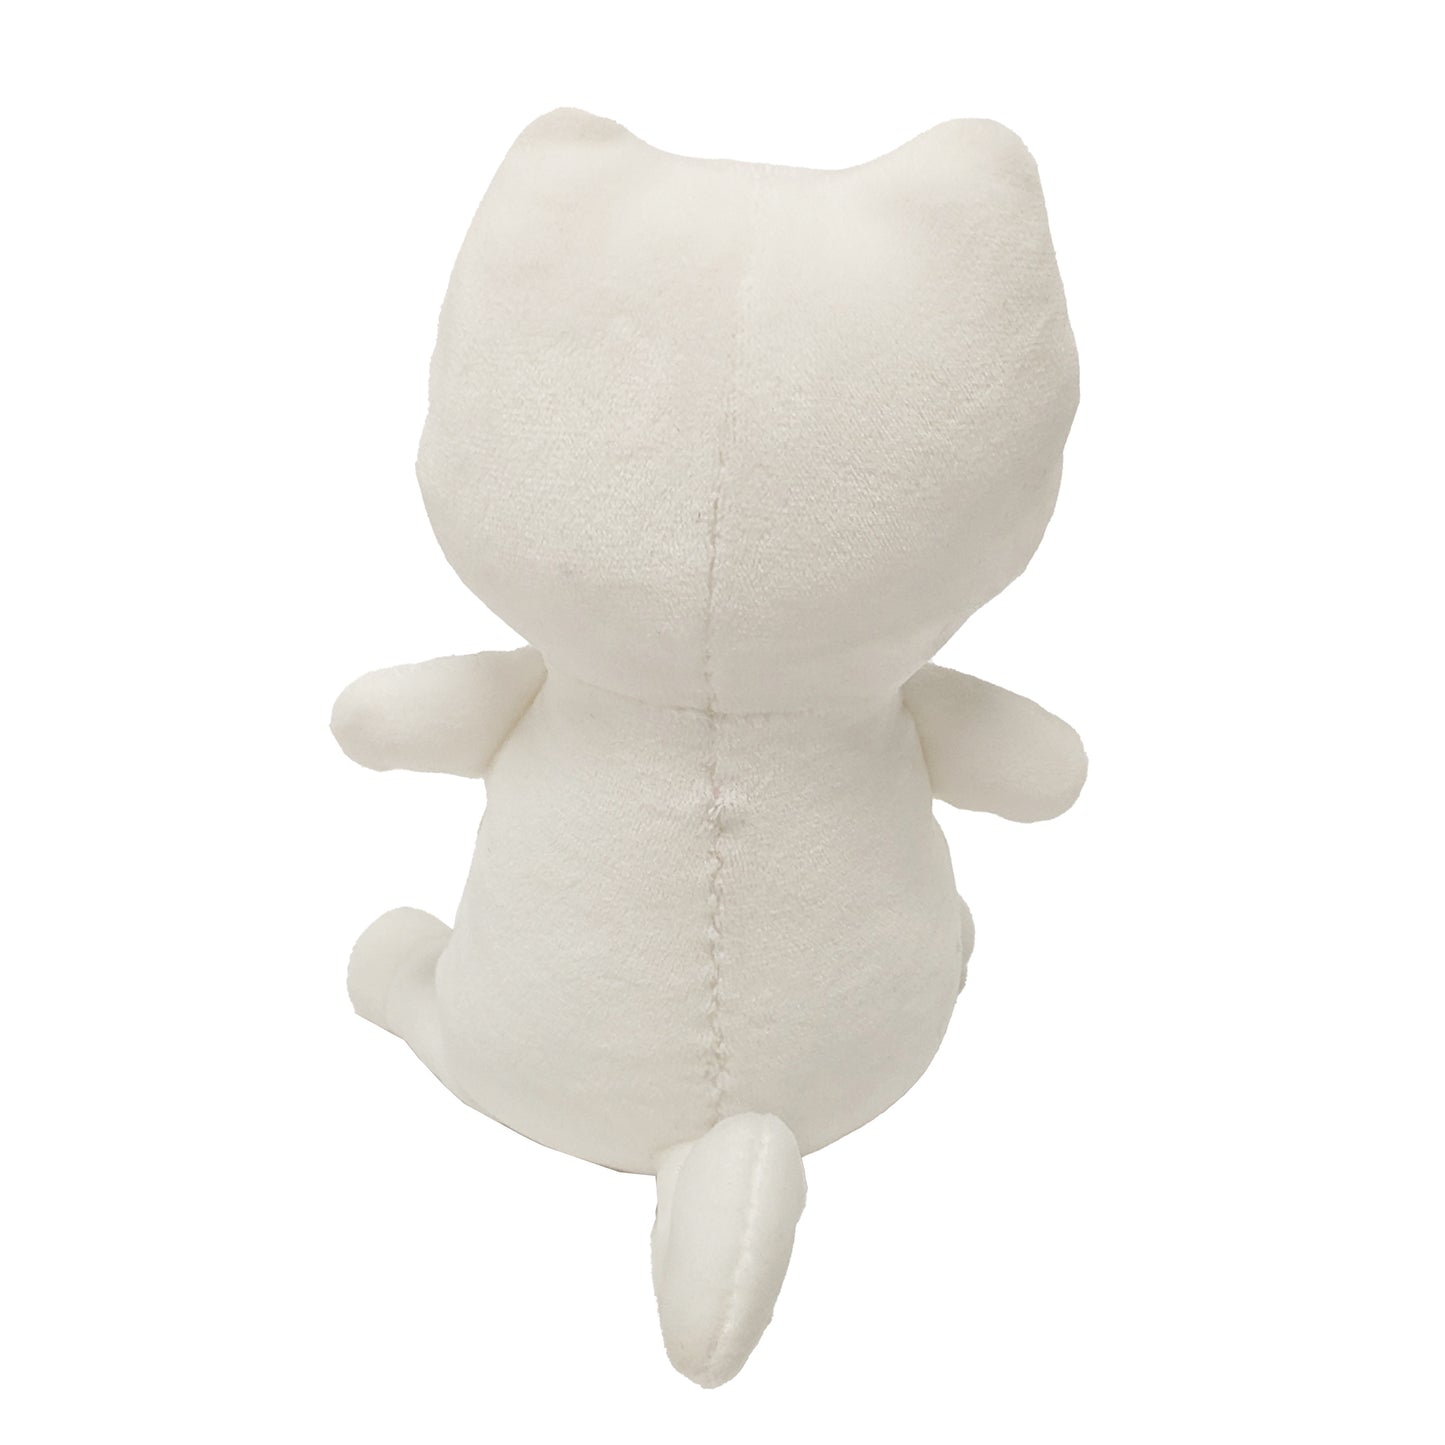 Noodlecat Plushie with Removable Hoodie - NOW IN STOCK! 🩷